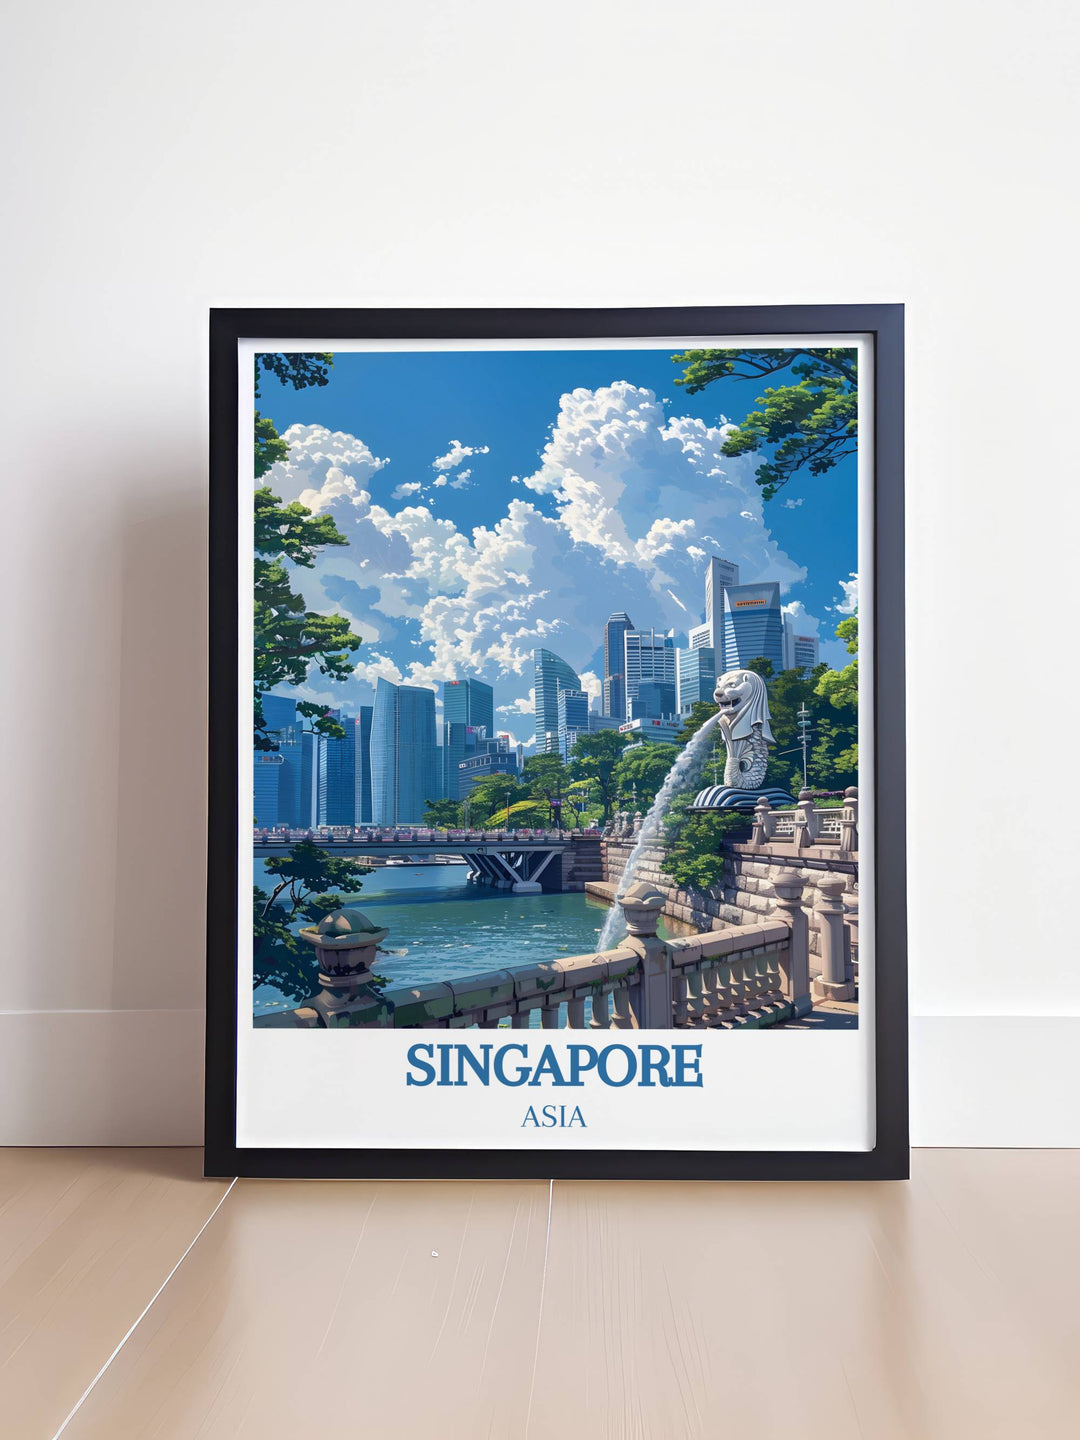 Experience the magic of Merlion Park with our Singapore Framed Art, showcasing the iconic Merlion statue and stunning Marina Bay backdrop.